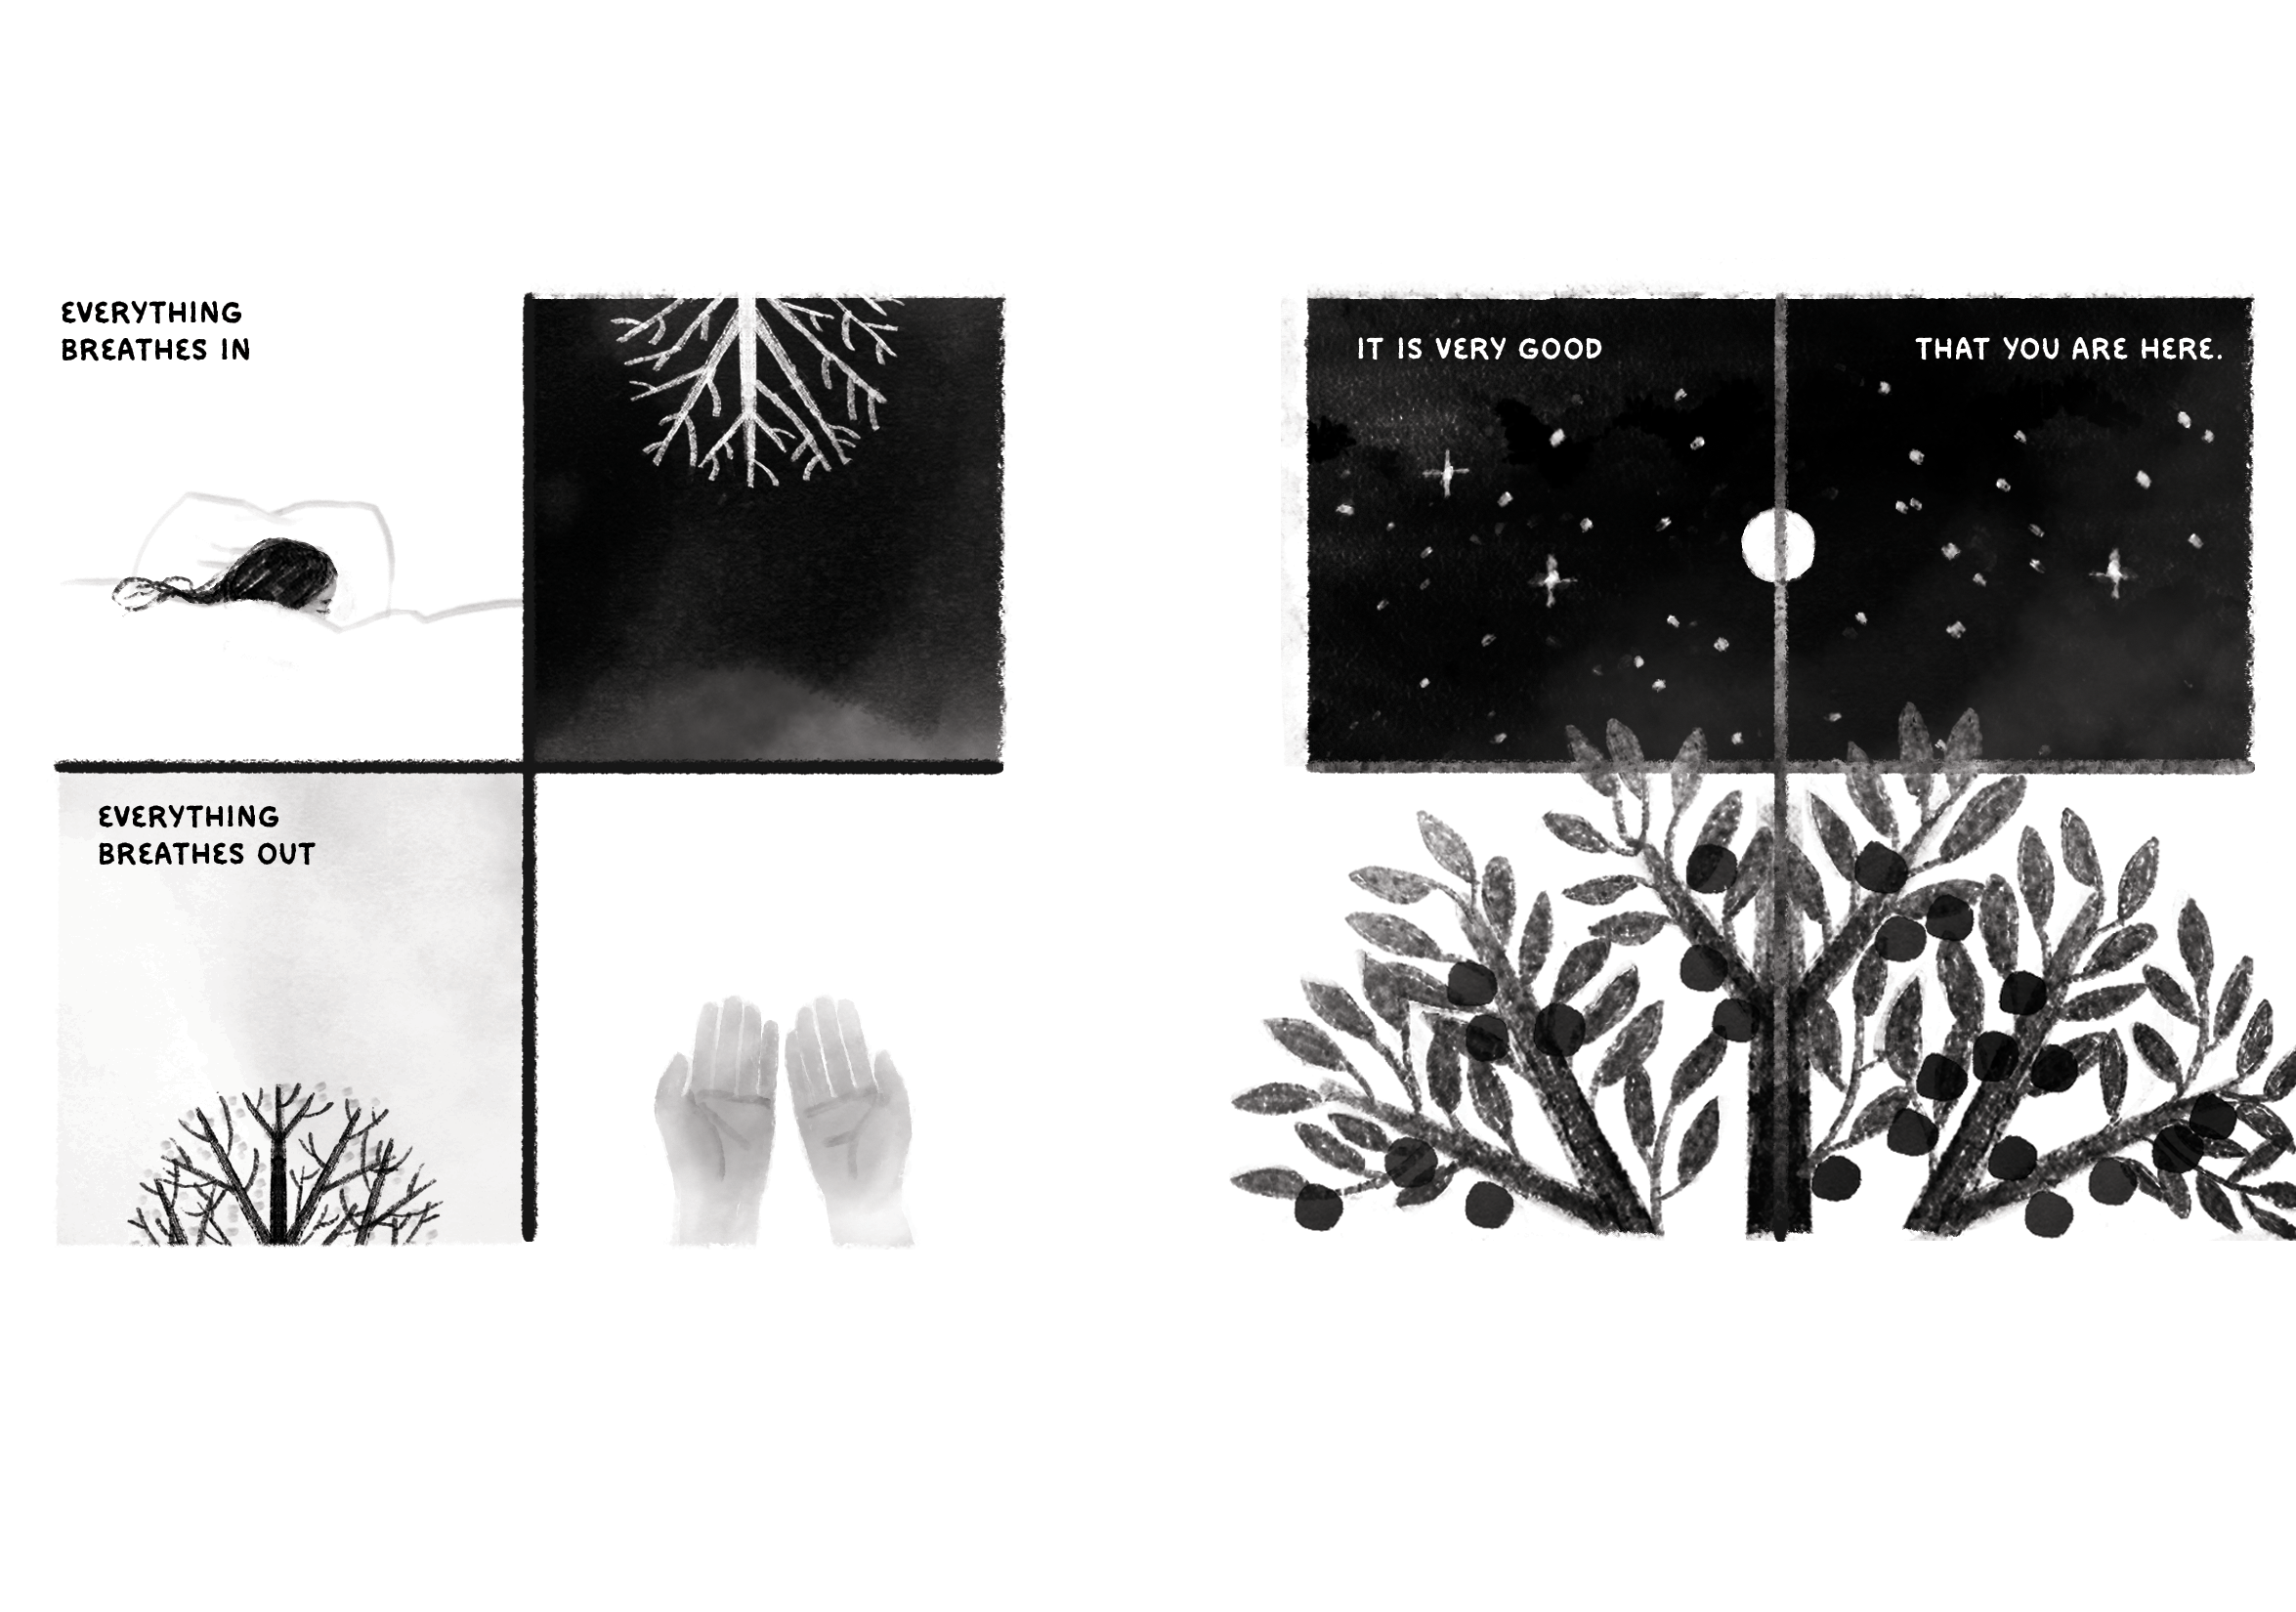 Two four-panel comics. First comic text: Everything breathes in, everything breathes out. First comic images: A figure tucked in bed. Tree roots reaching down into soil. Tree branches reaching up into the sky. Hands open. Second comic text: It is very good that you are here. Second comic images: A night sky full of stars, with a full moon. An abundant fruiting tree.